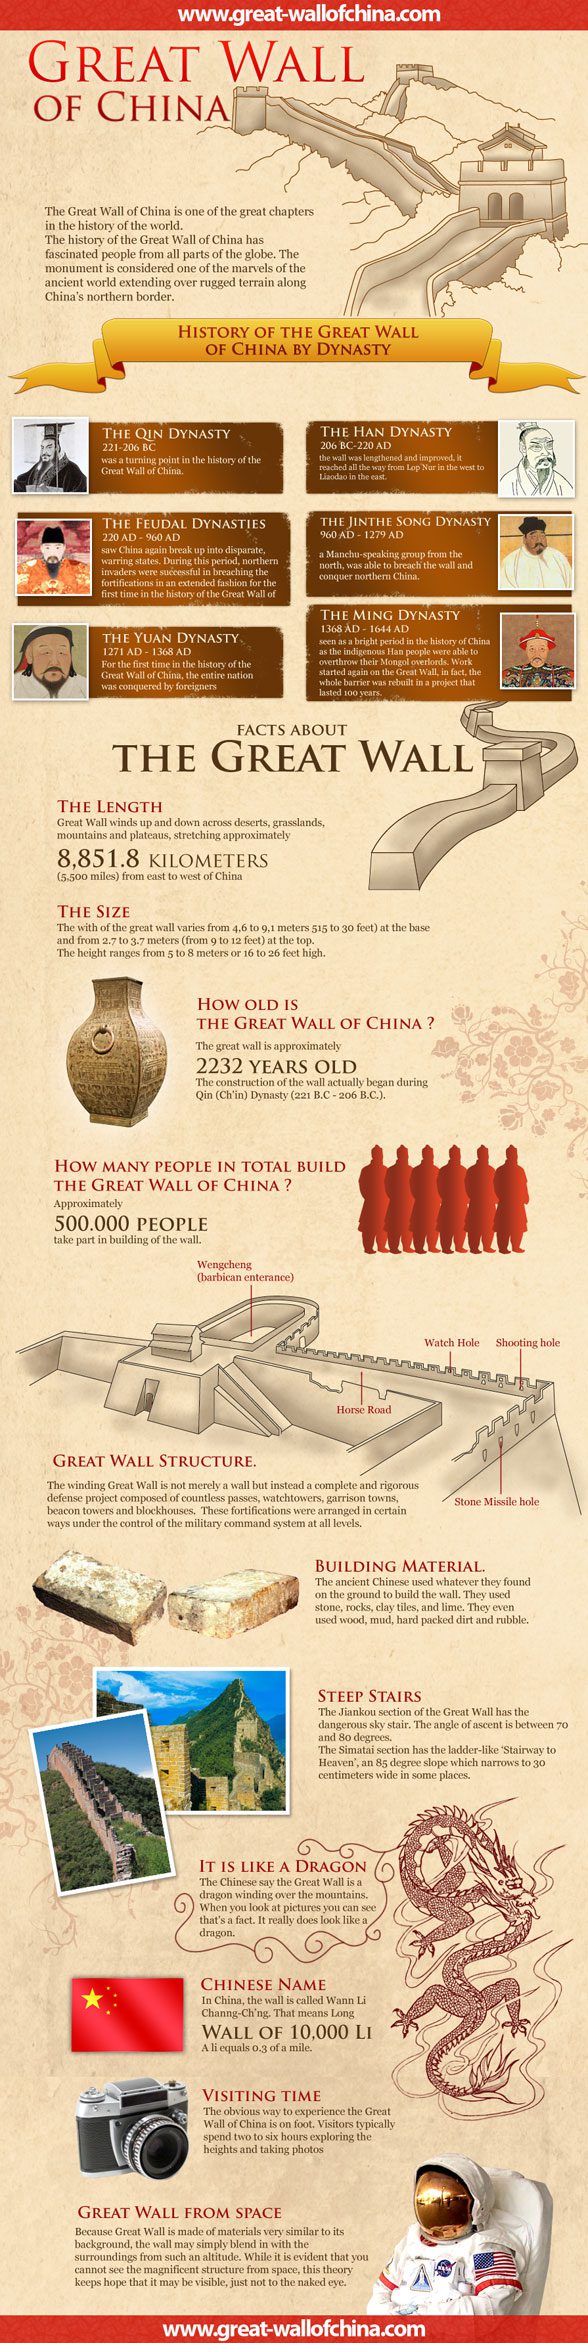 Qin Dynasty Inventions